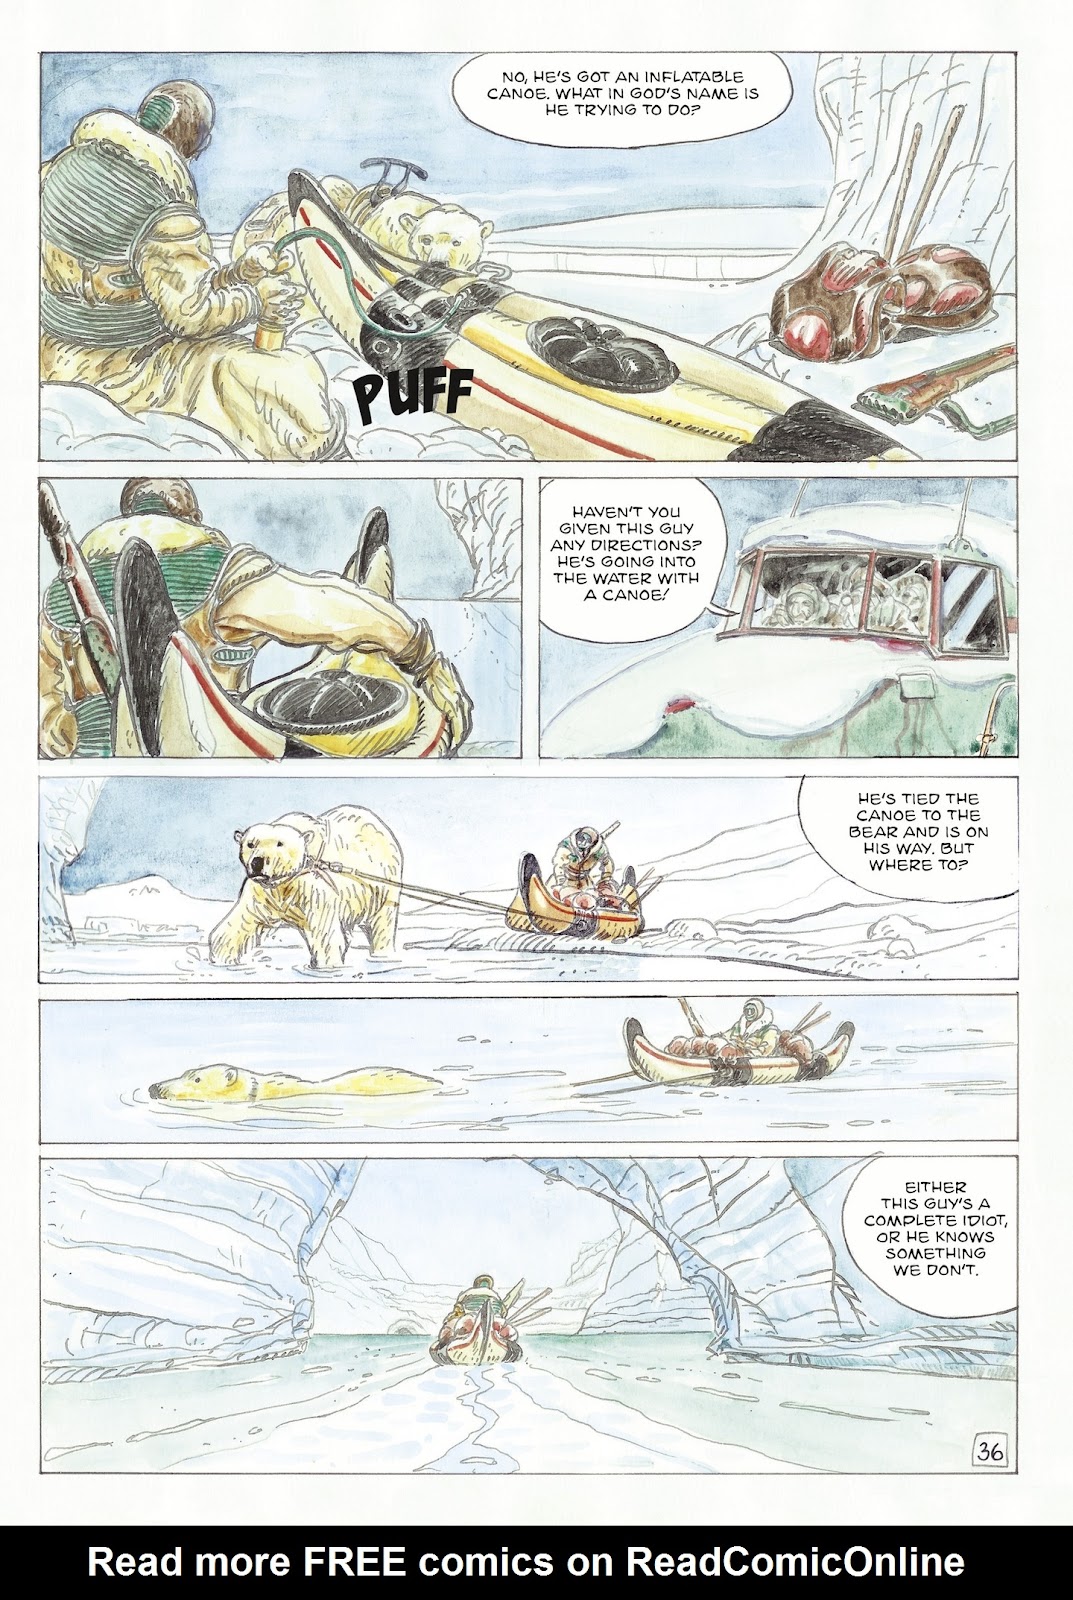 The Man With the Bear issue 1 - Page 38